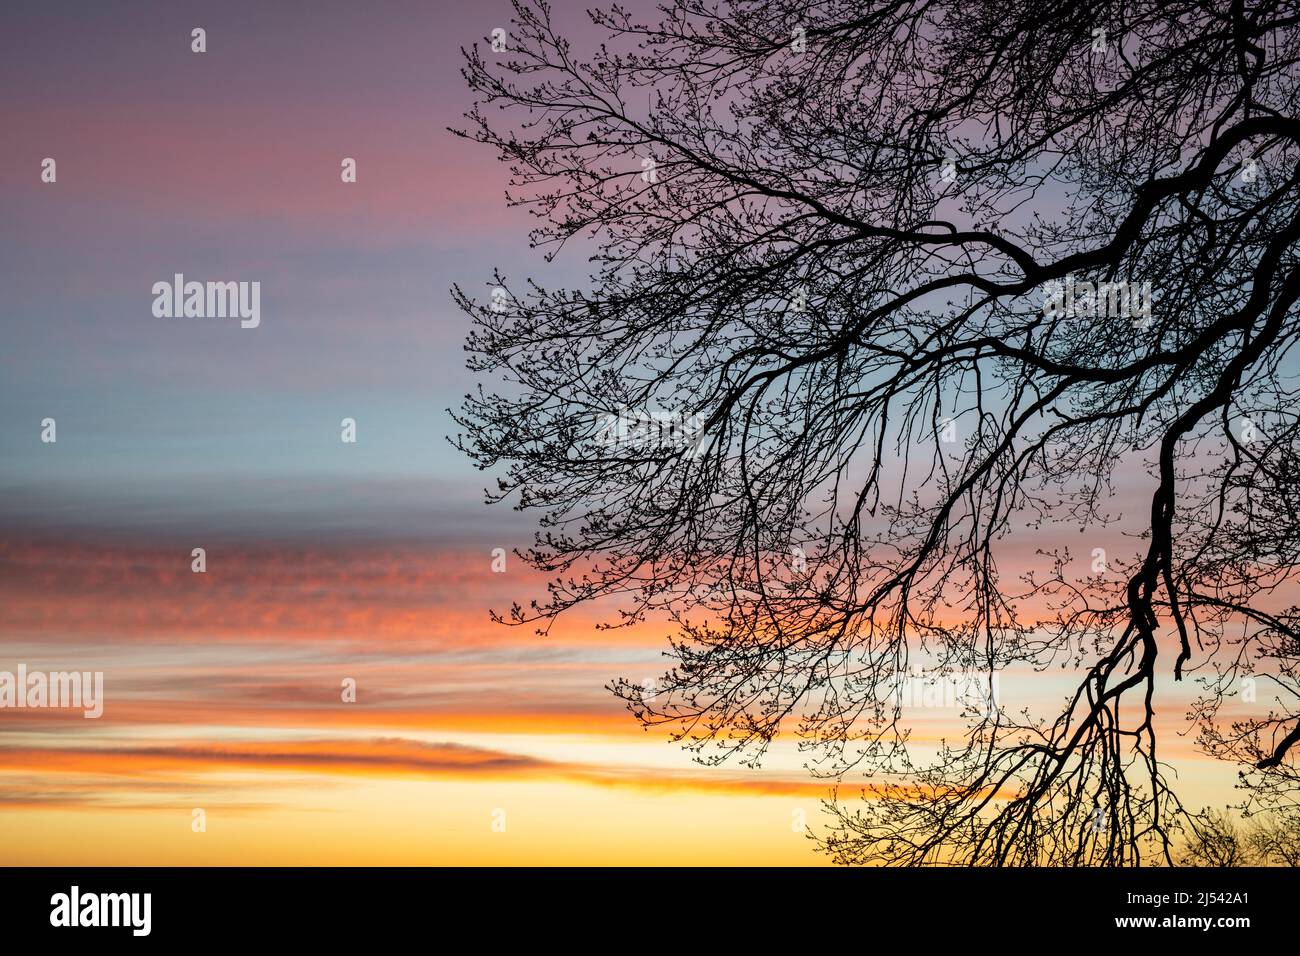 Silhouette tree branches at sunrise with a colourful sky in the warwickshire countryside. UK Stock Photo